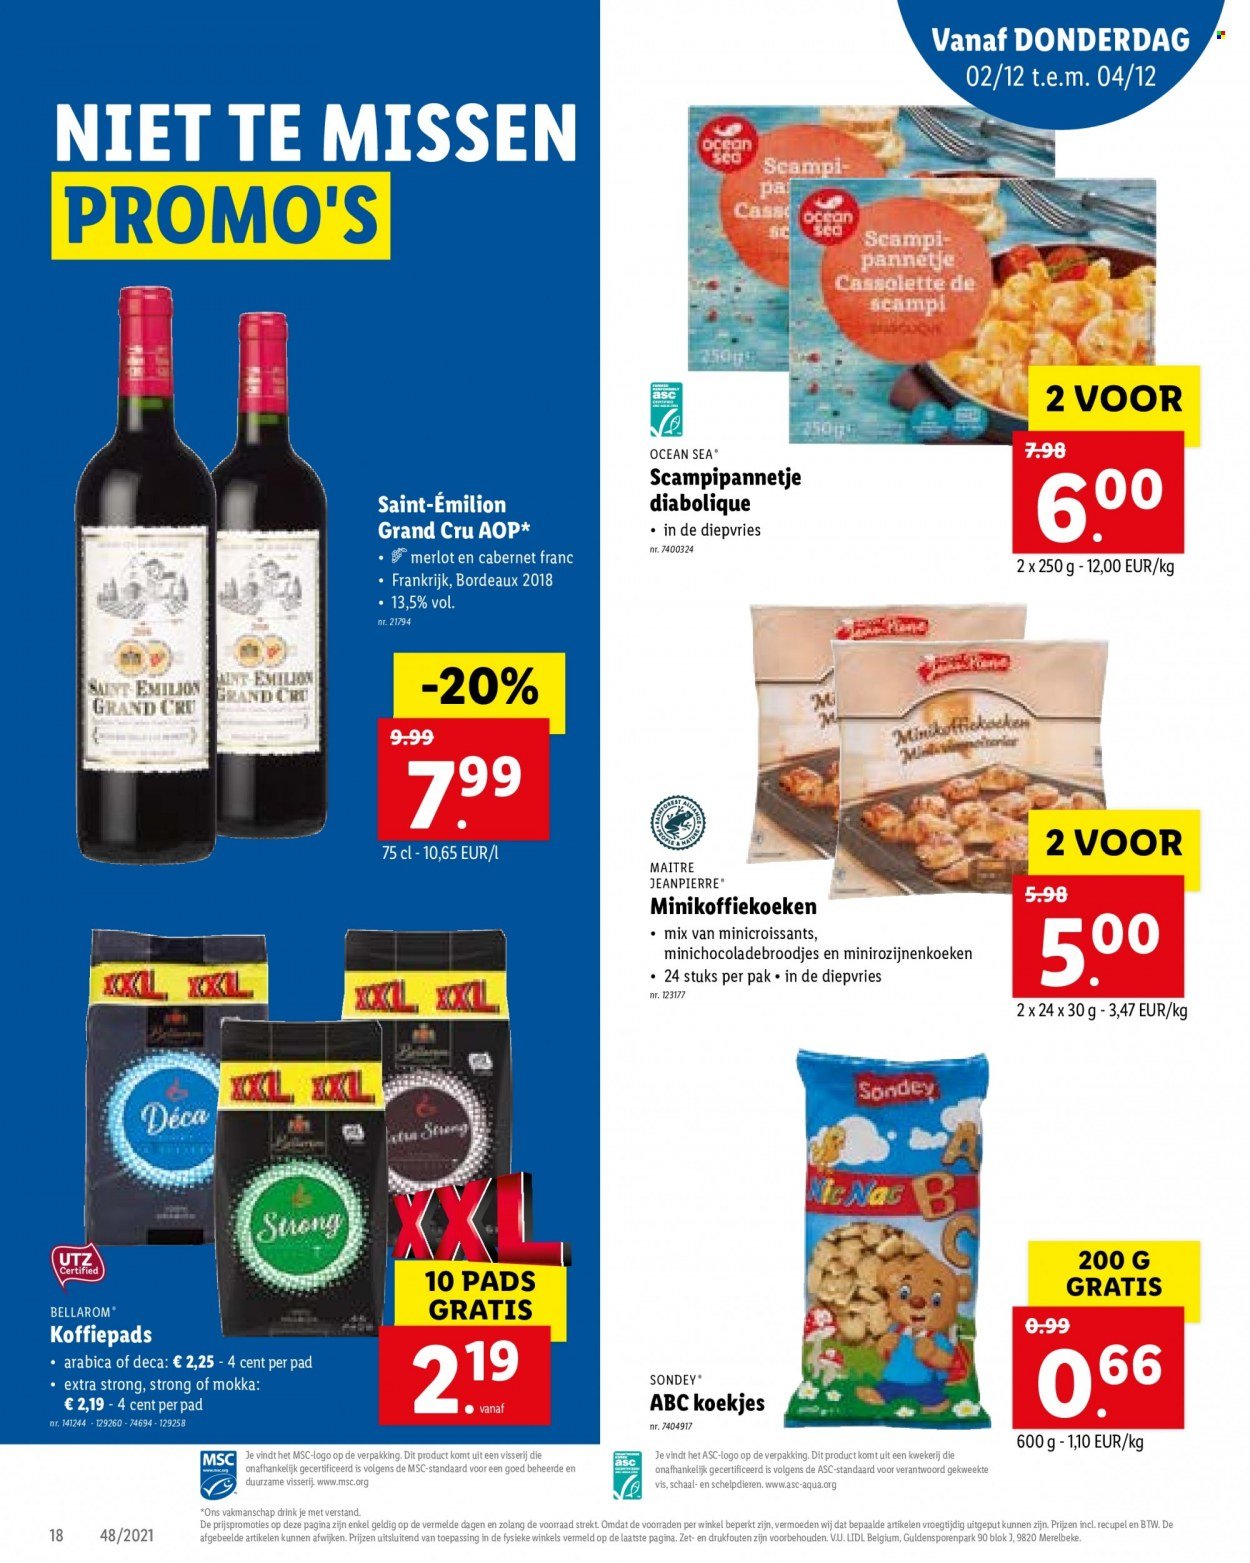 Catalogue Lidl - 29.11.2021 - 4.12.2021. Page 18.